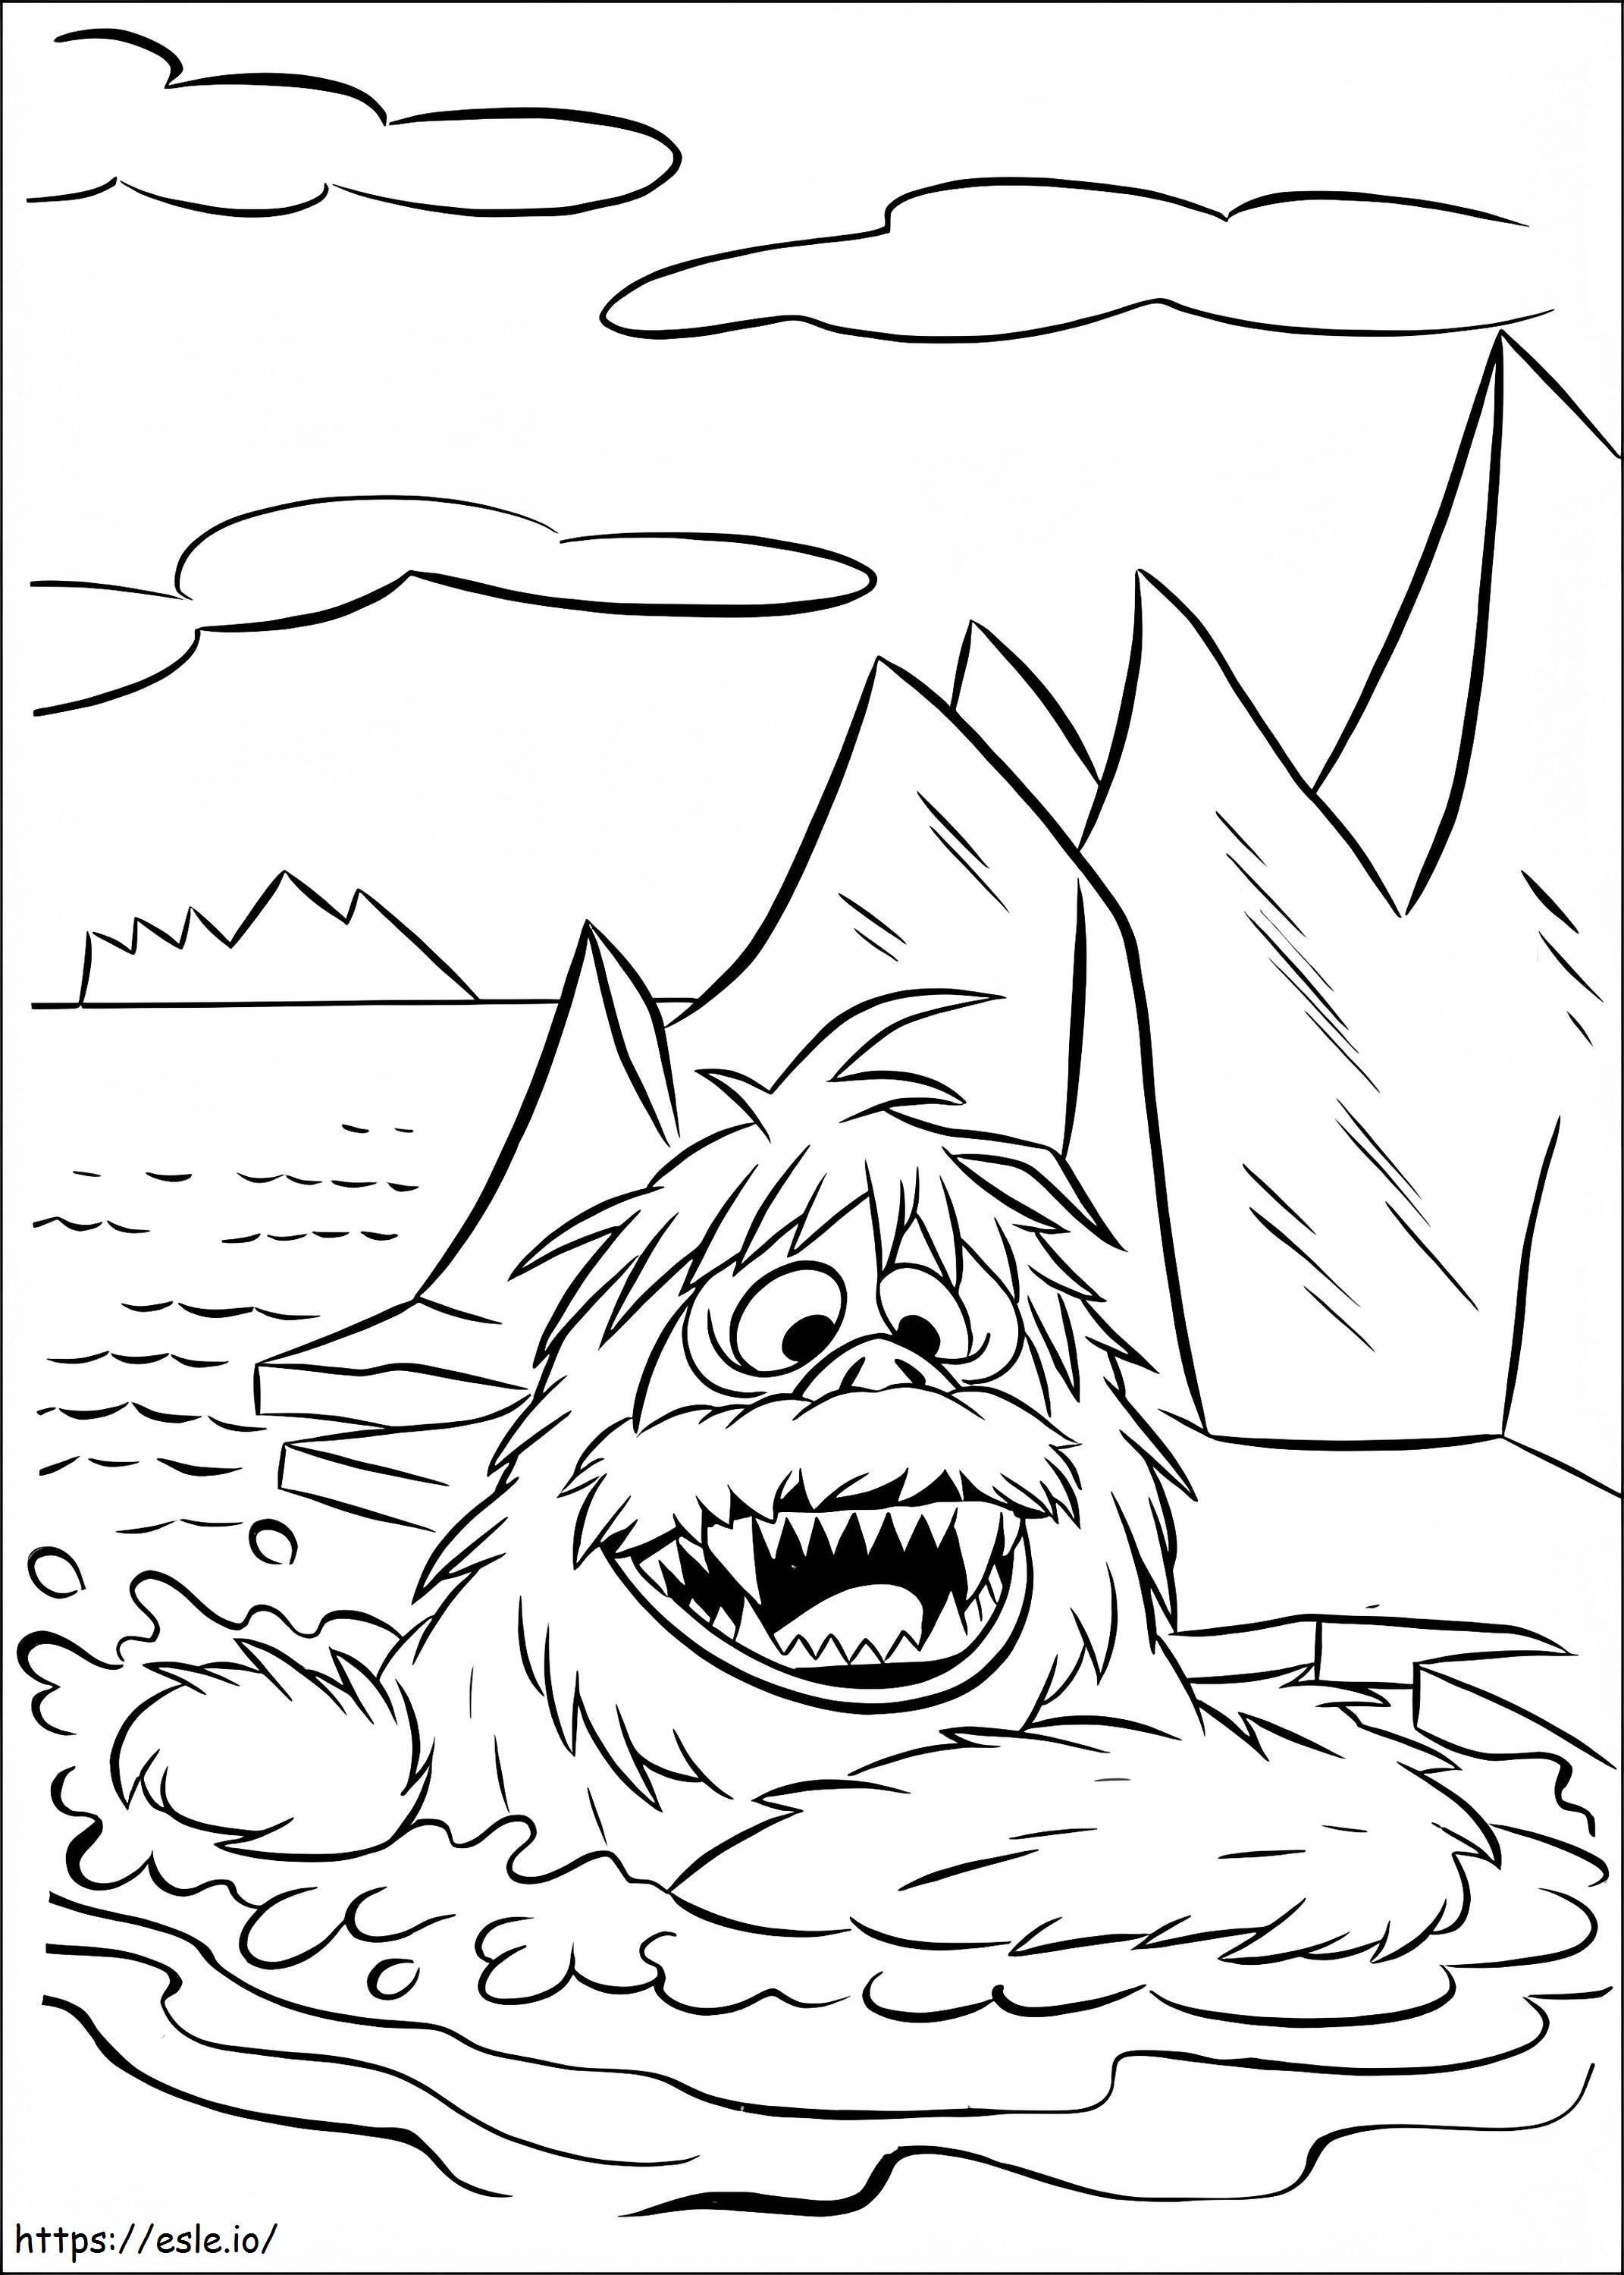 Snowmonster From Rudolph coloring page